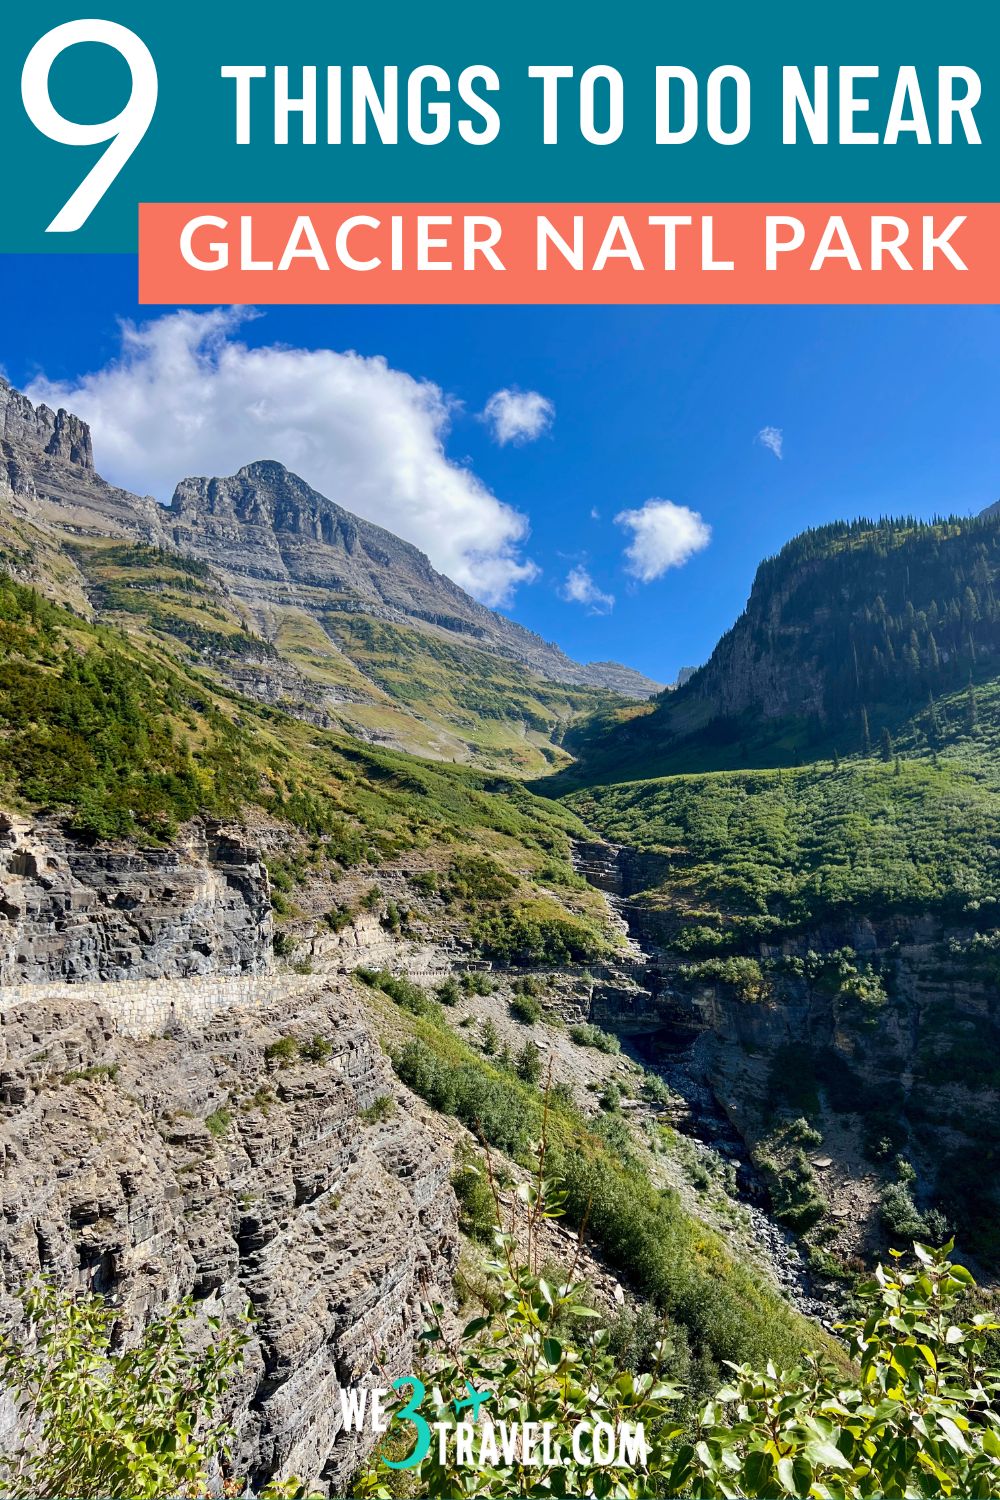 9 Things to do near Glacier National Park